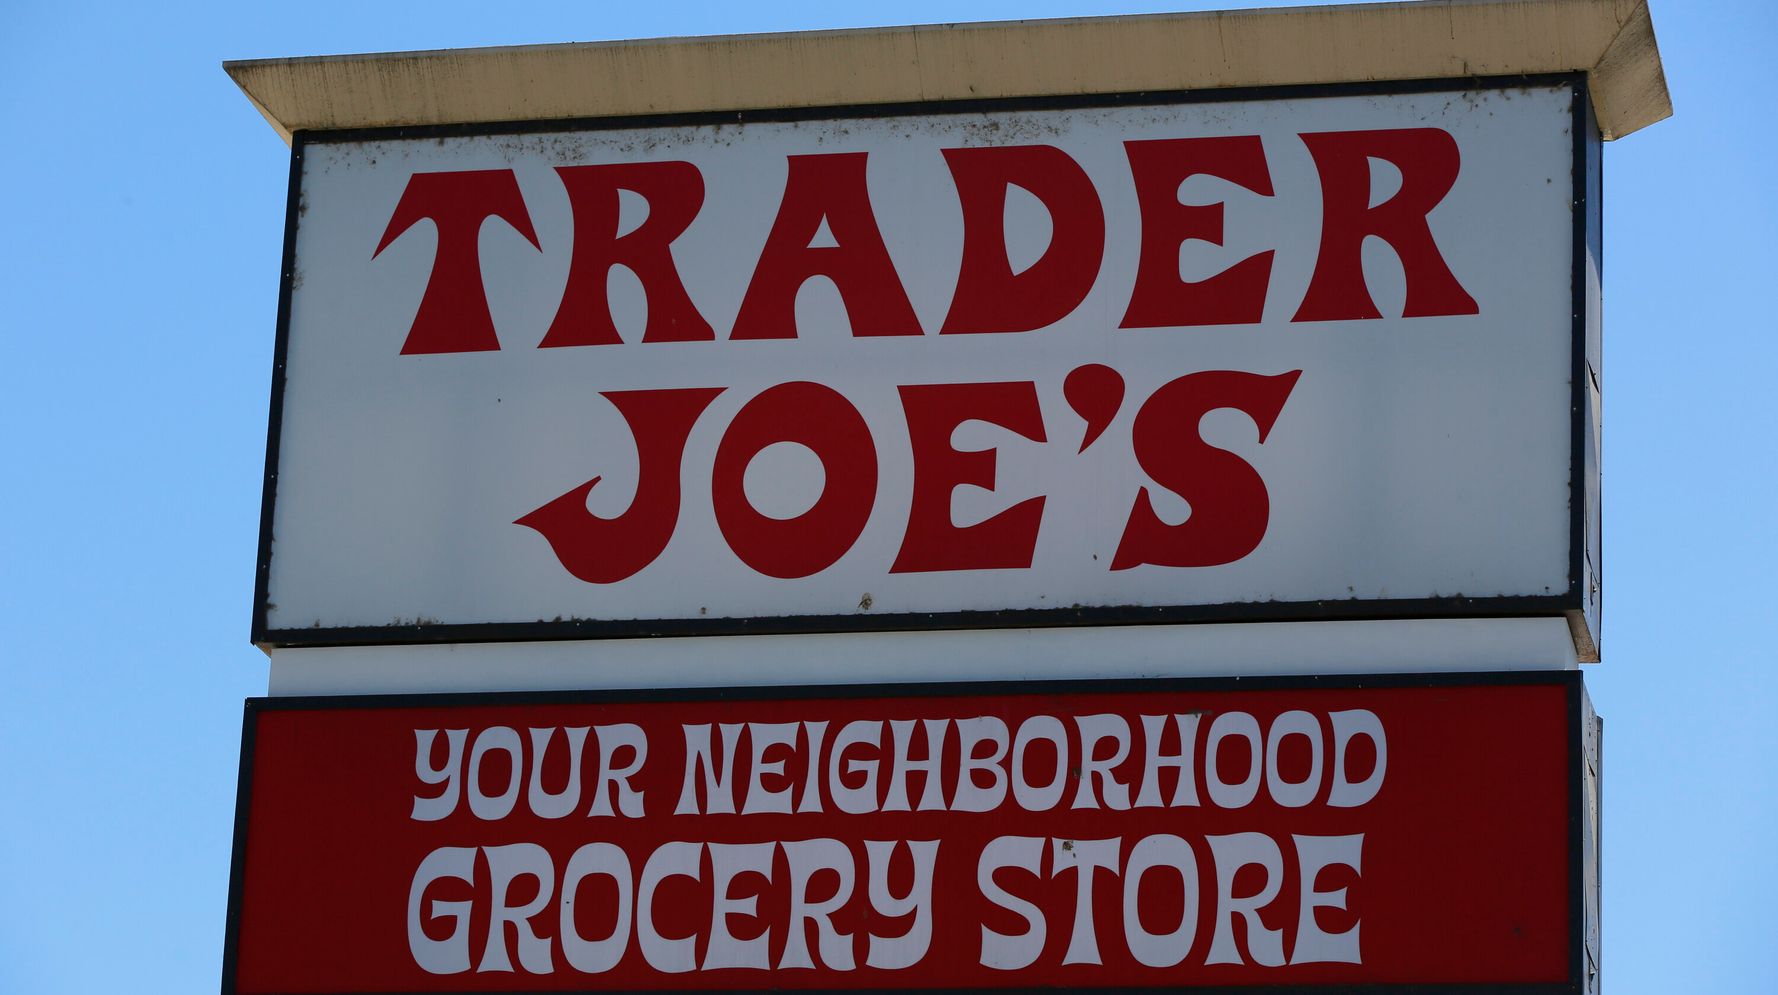 Trader Joe’s Staff Say The Firm Is Cracking Down On Their Union Effort and hard work